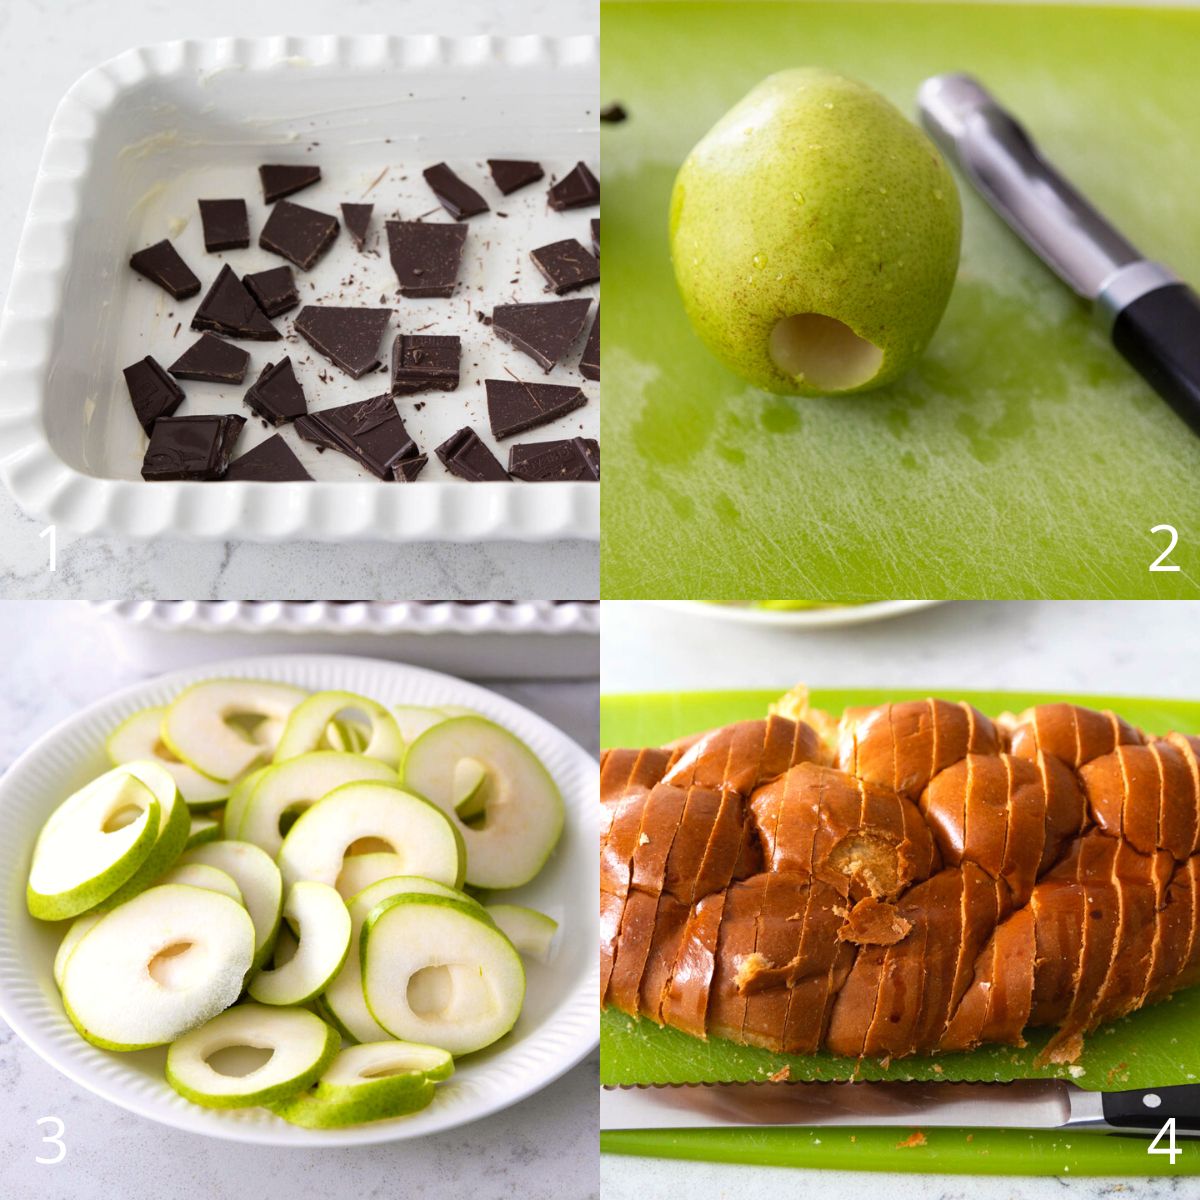 The photo collage shows how to prepare the ingredients.